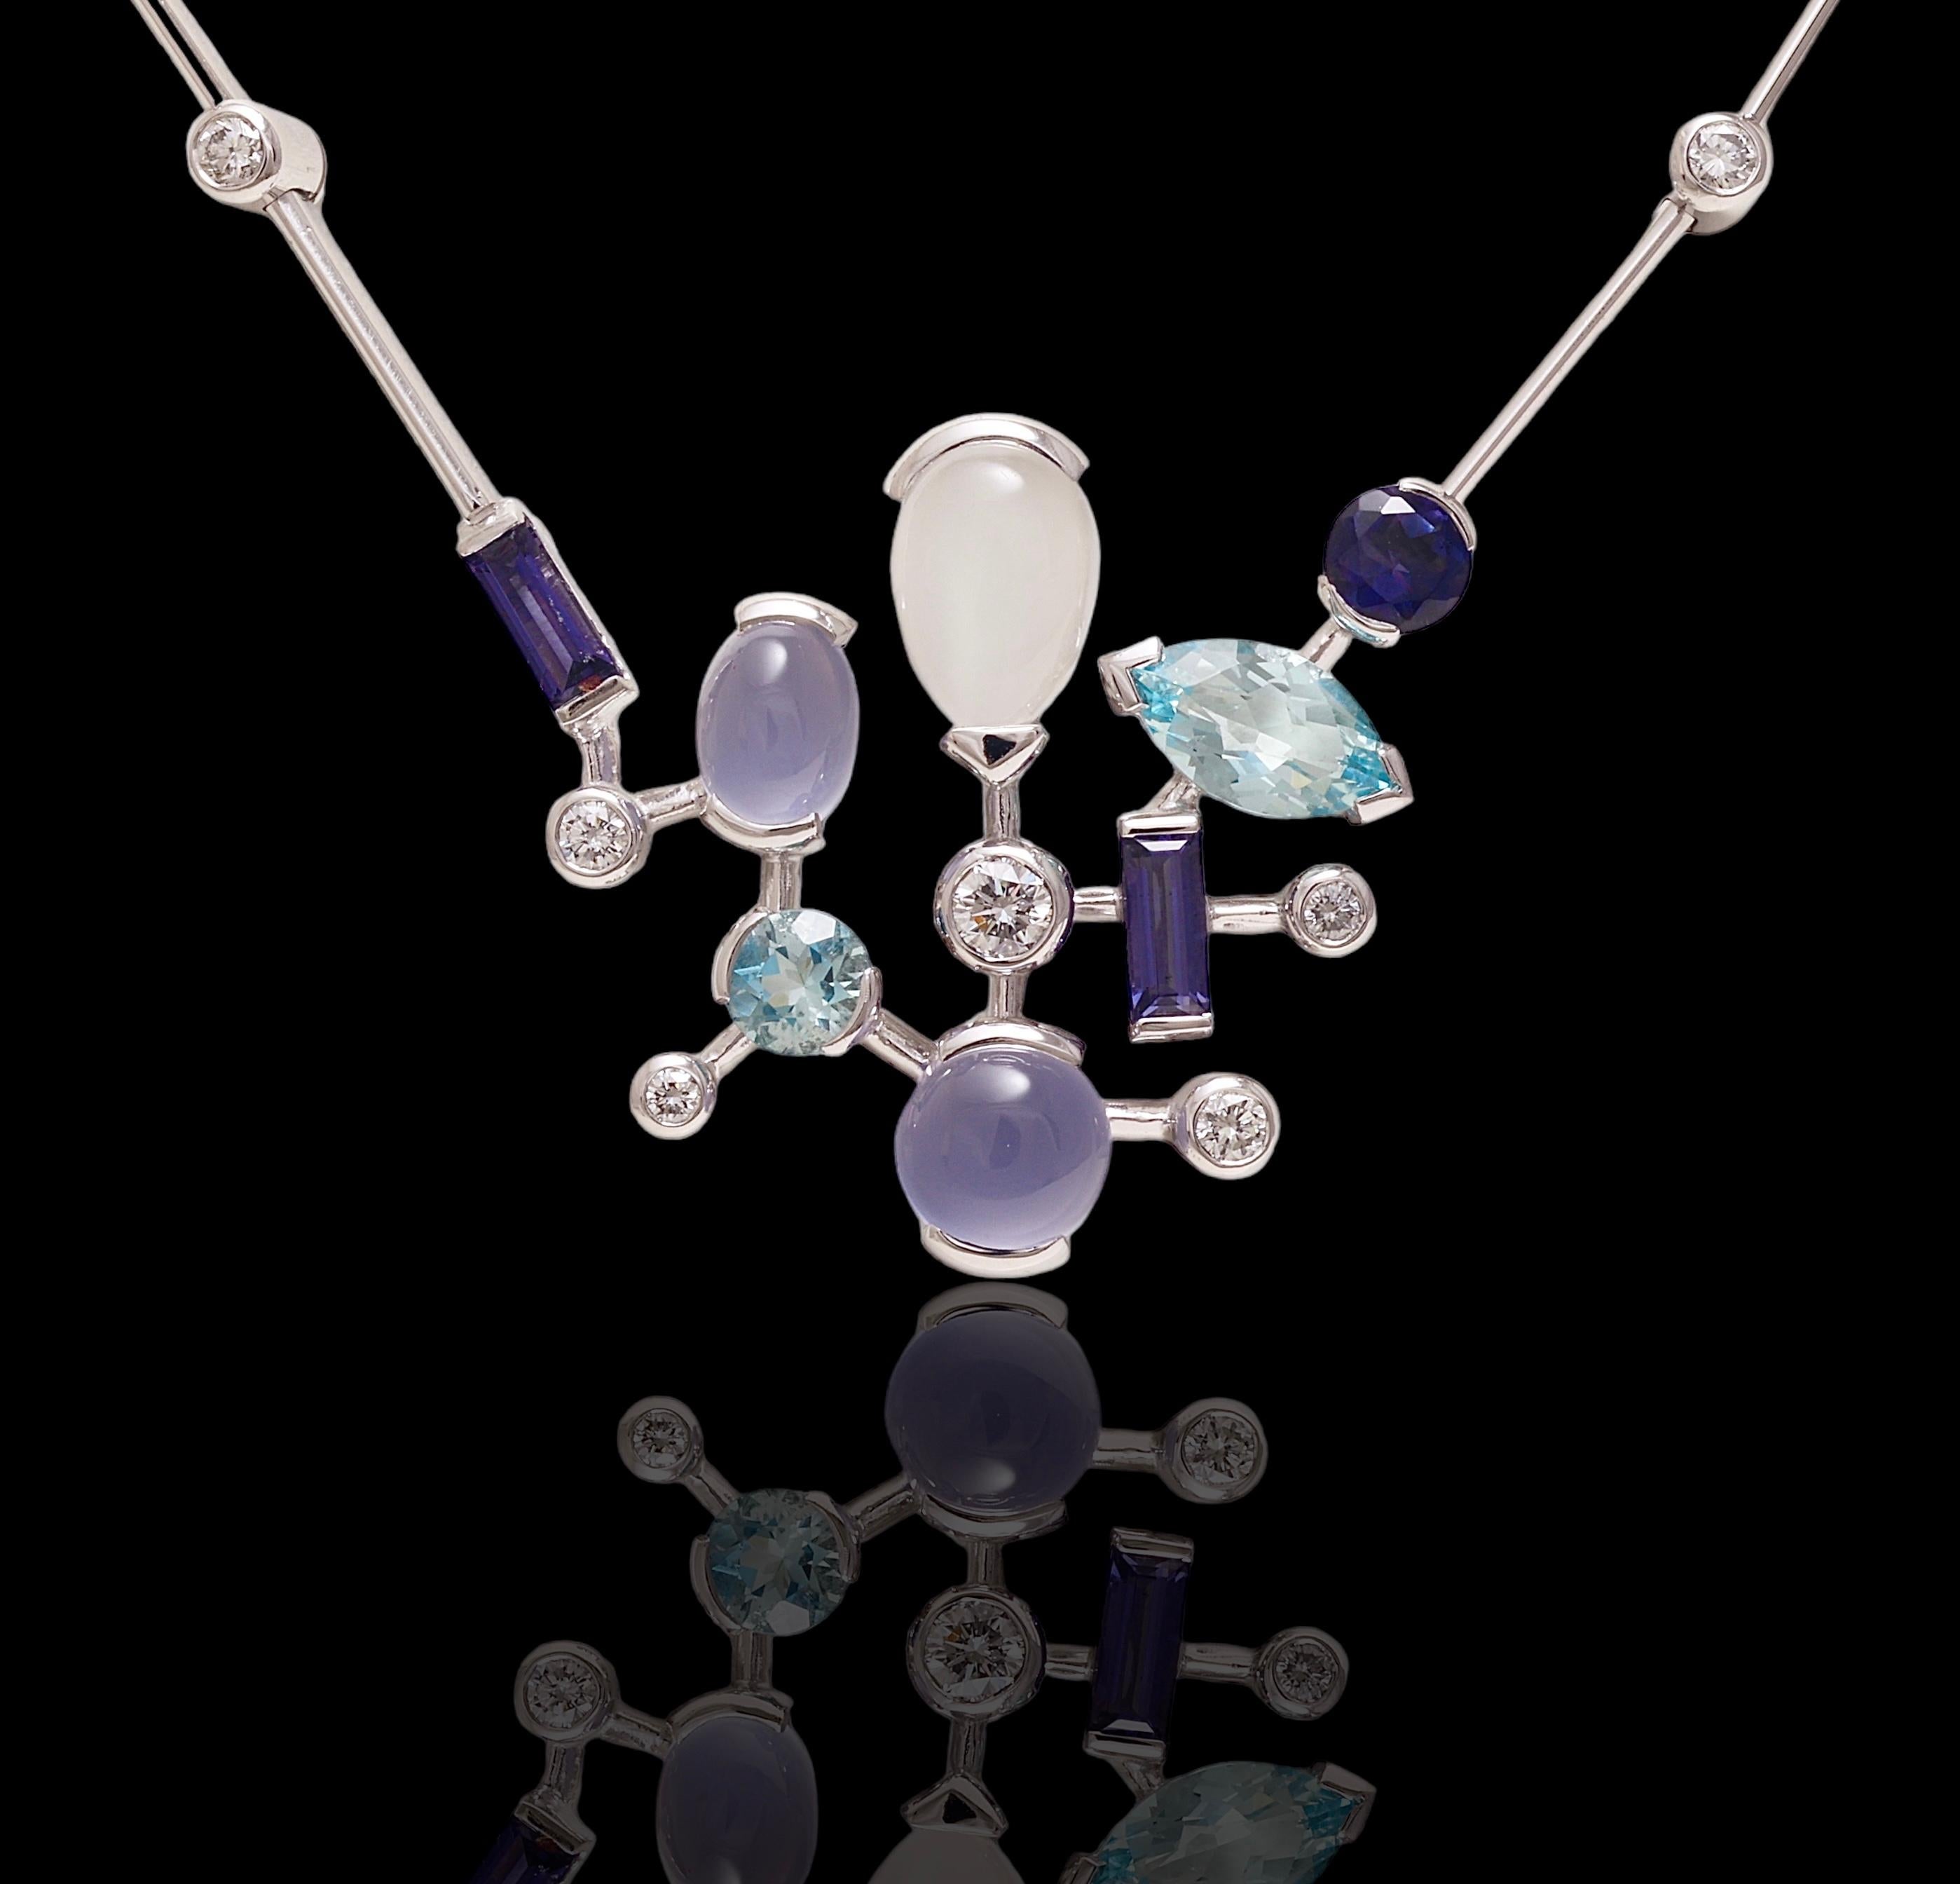 Original 18 kt. White Gold Cartier Necklace From The Meli Melo Collection with Moonstone and Aquamarine

Gemstones: diamonds and semiprecious coloured stones

The centrepiece is accented by a cluster of diamond slight blue faceted aquamarines and